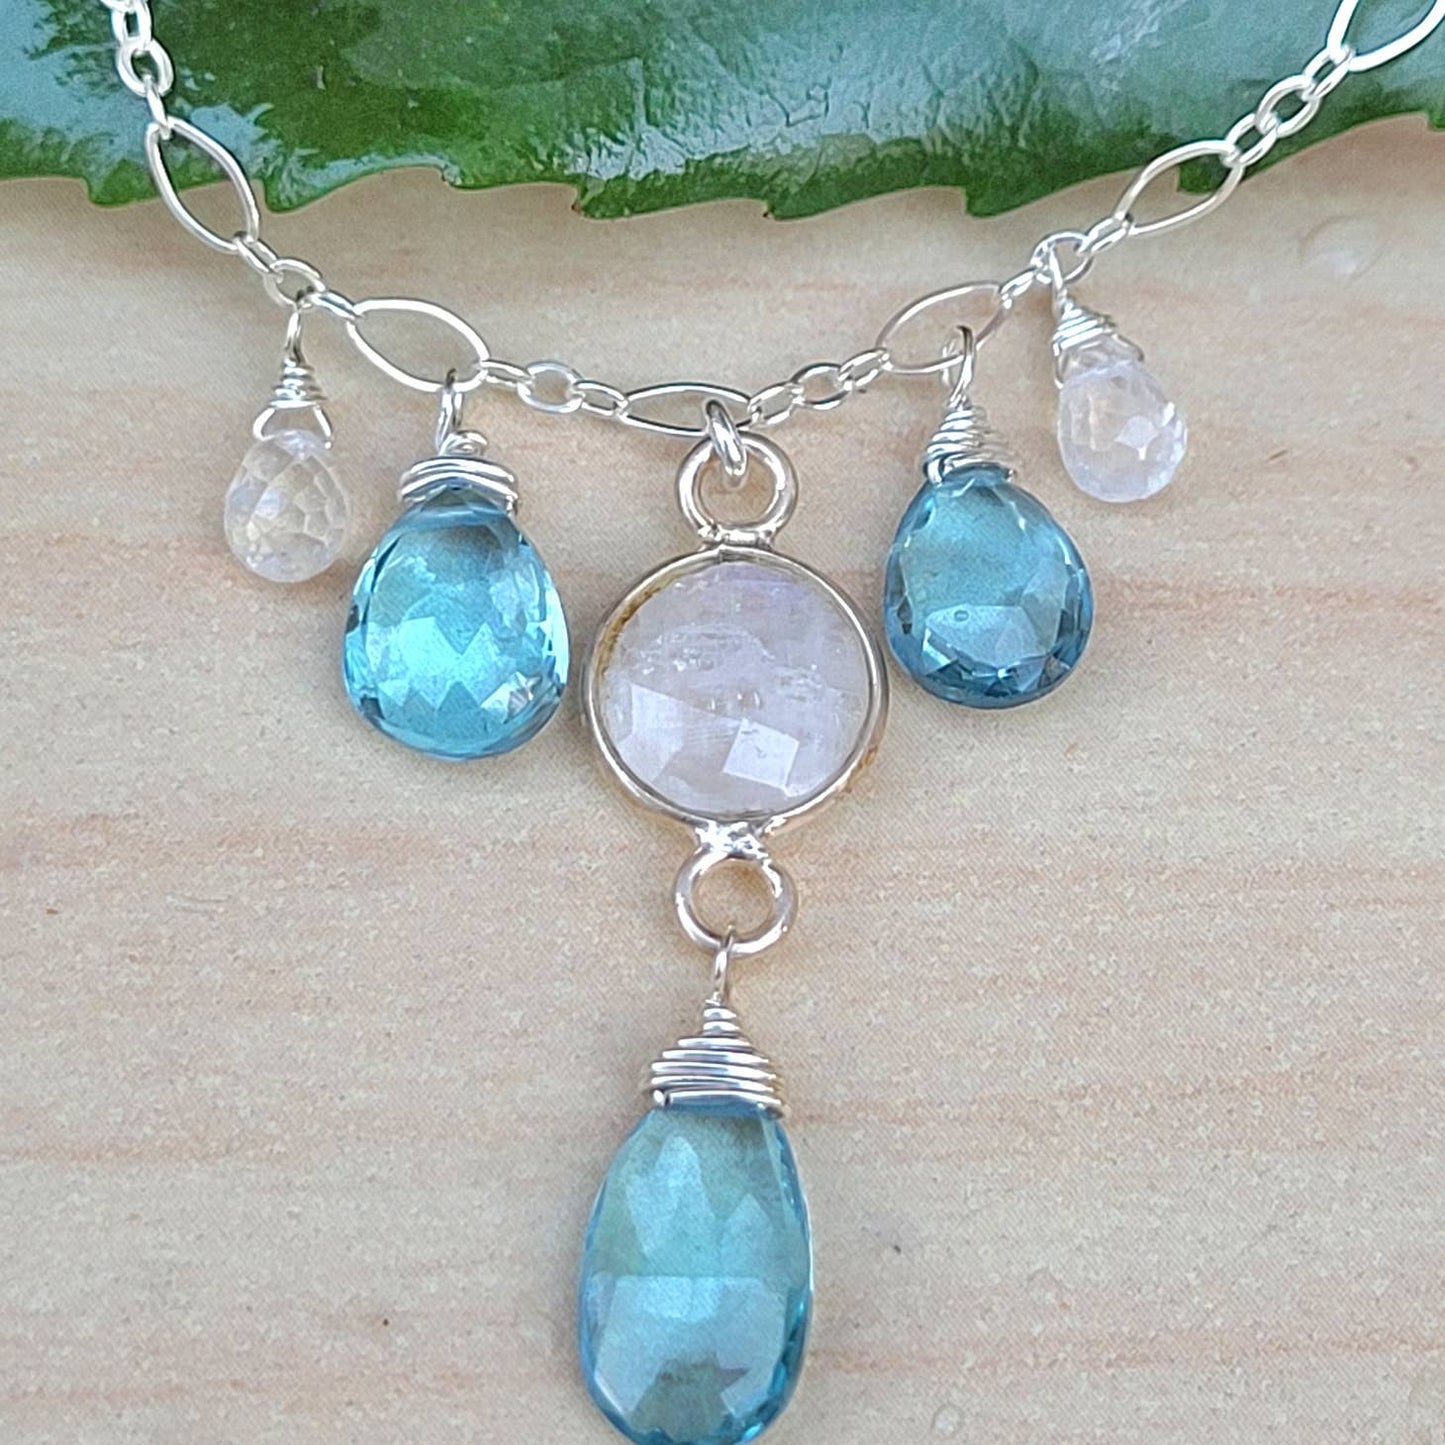 London Blue Topaz and Moonstone Necklace